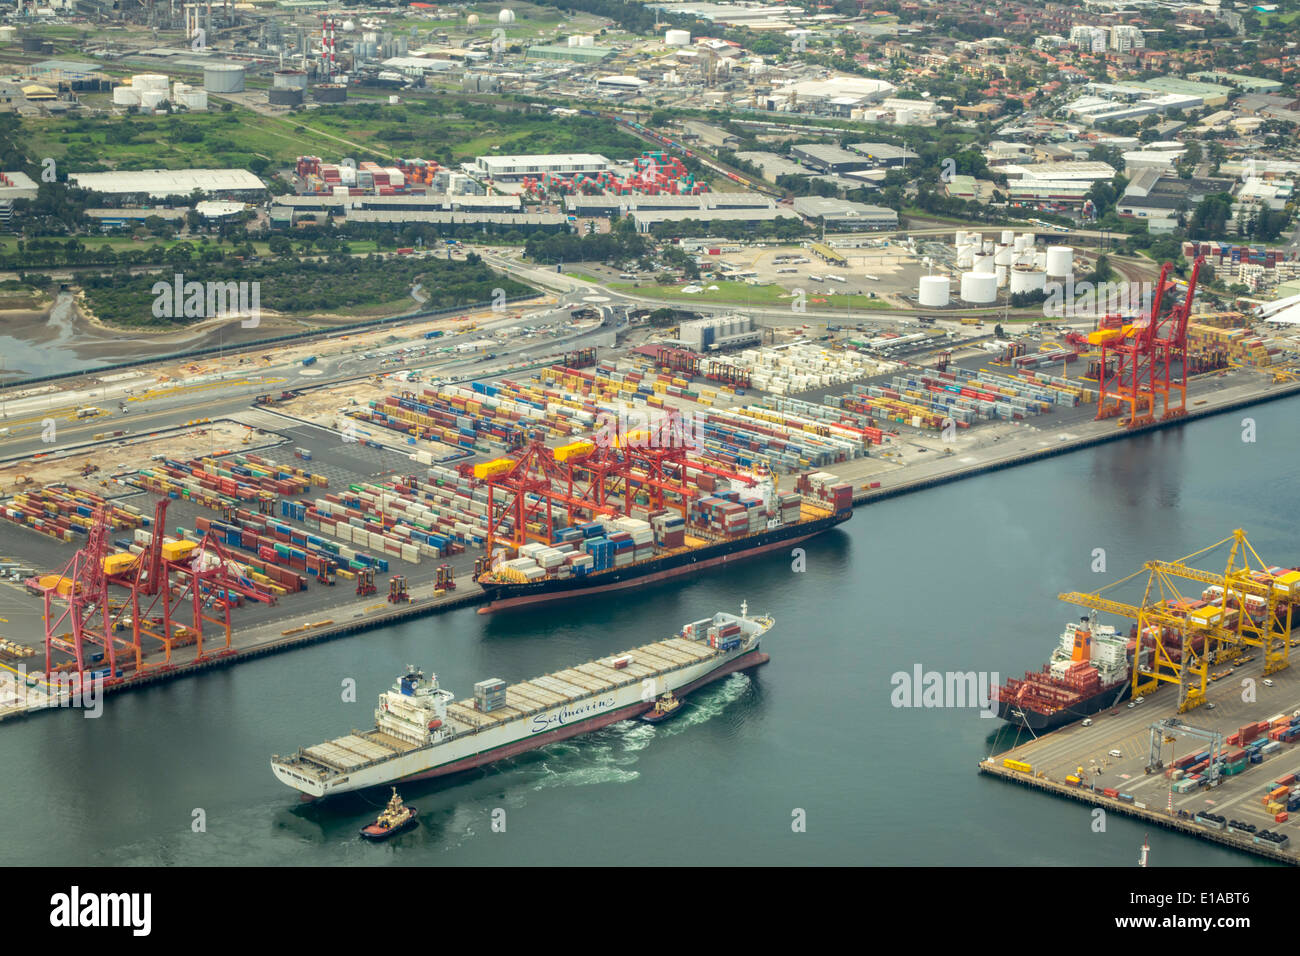 Sydney Australia,Banksmeadow,Port of Botany Bay,shipping,lifting cranes,cargo container ship,aerial overhead view from above,tugboat,AU140312072 Stock Photo